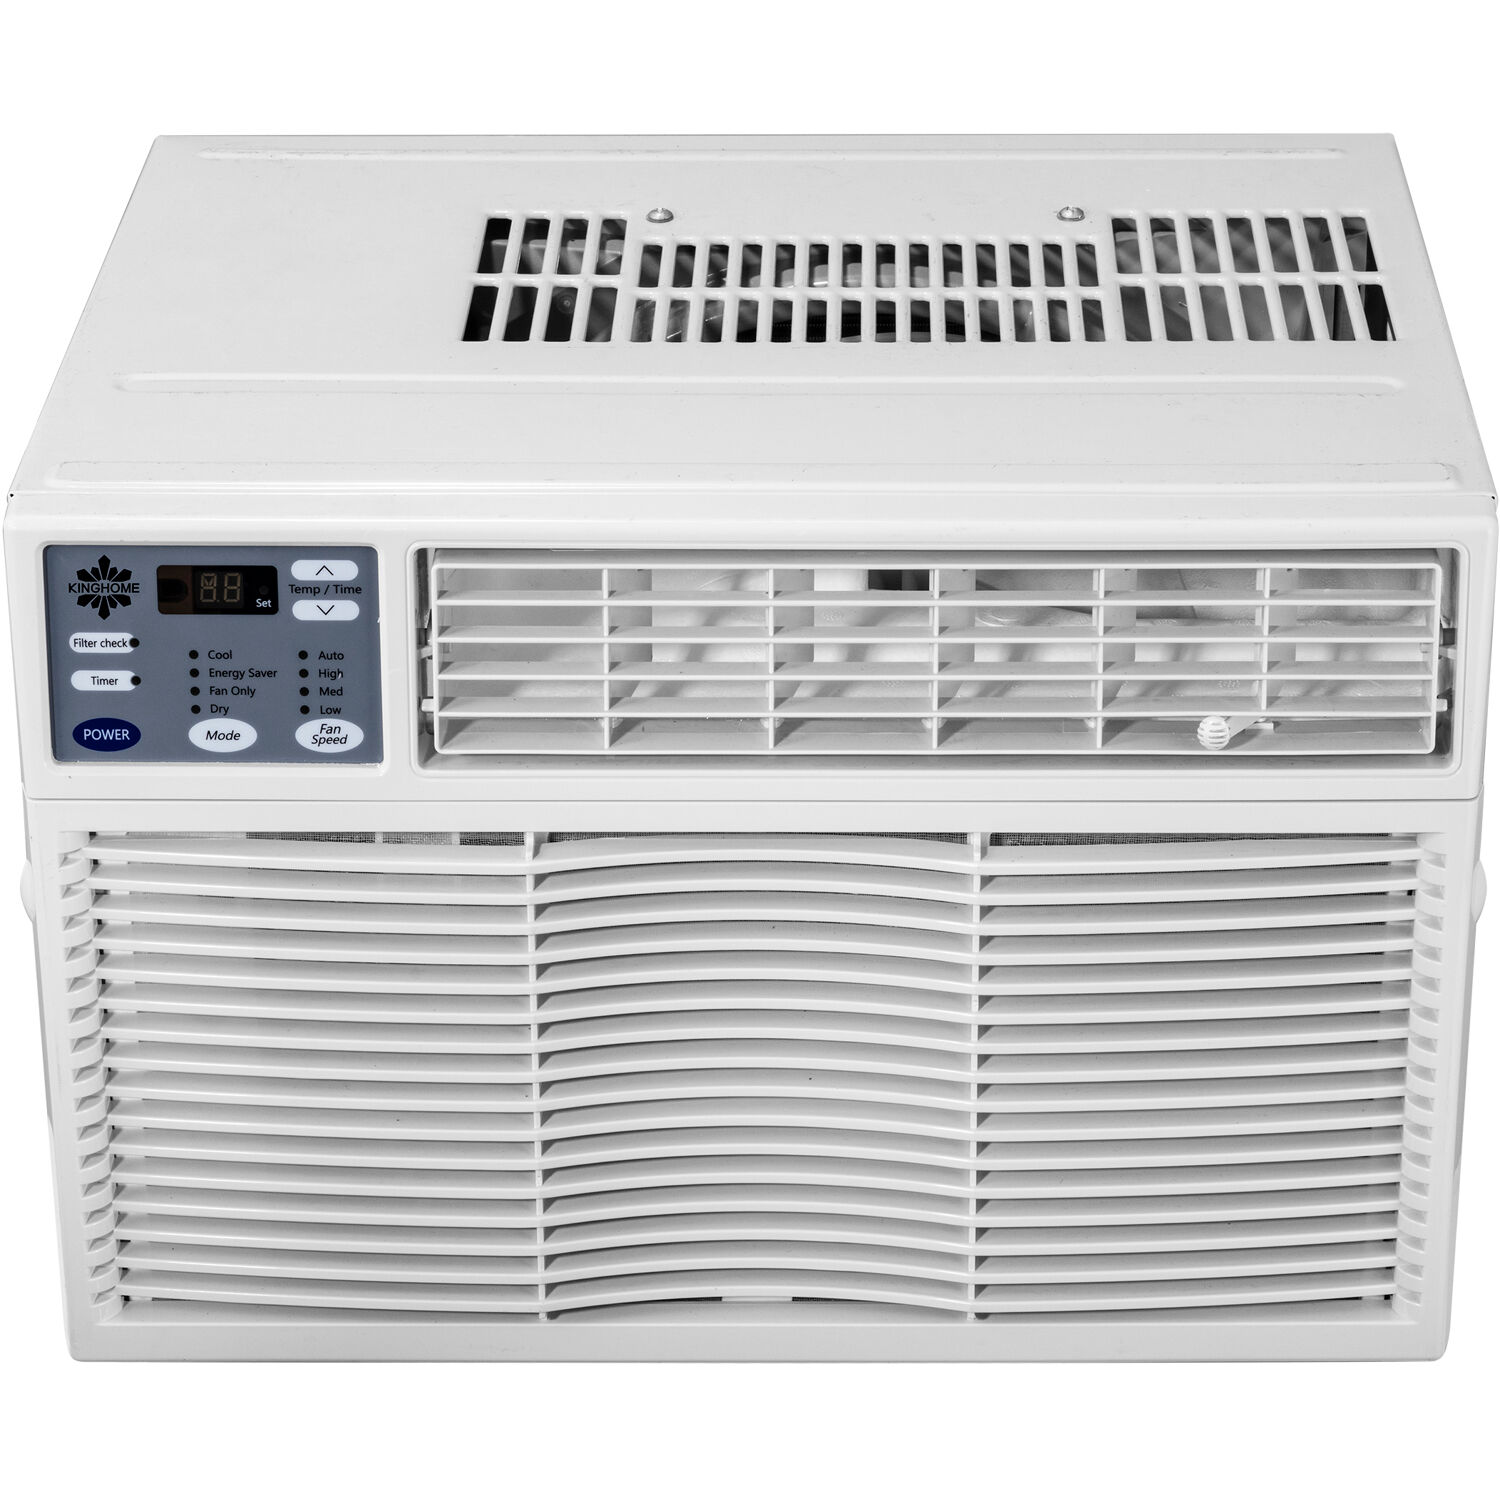 6,000 BTU Window Air Conditioner with Electronic Controls